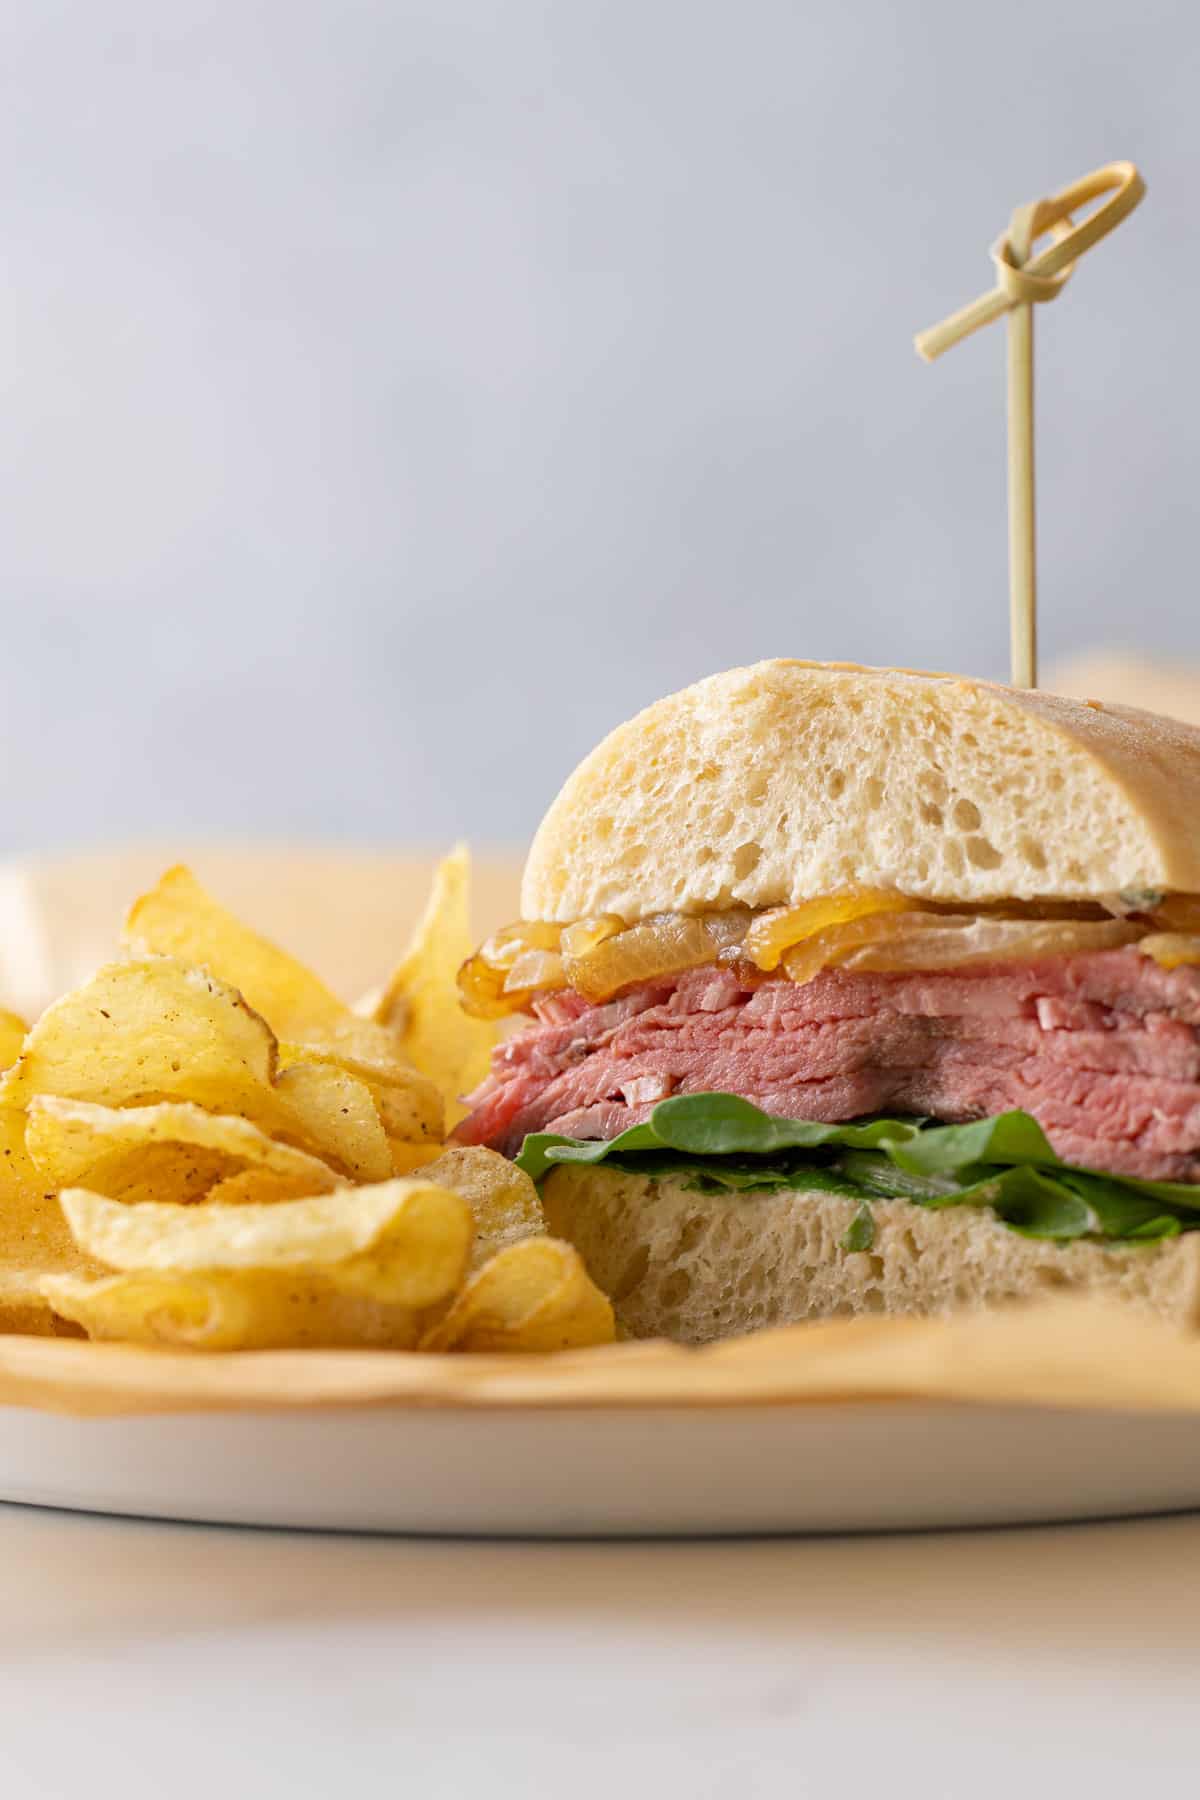 A prime rib sandwich on a plate with potato chips.